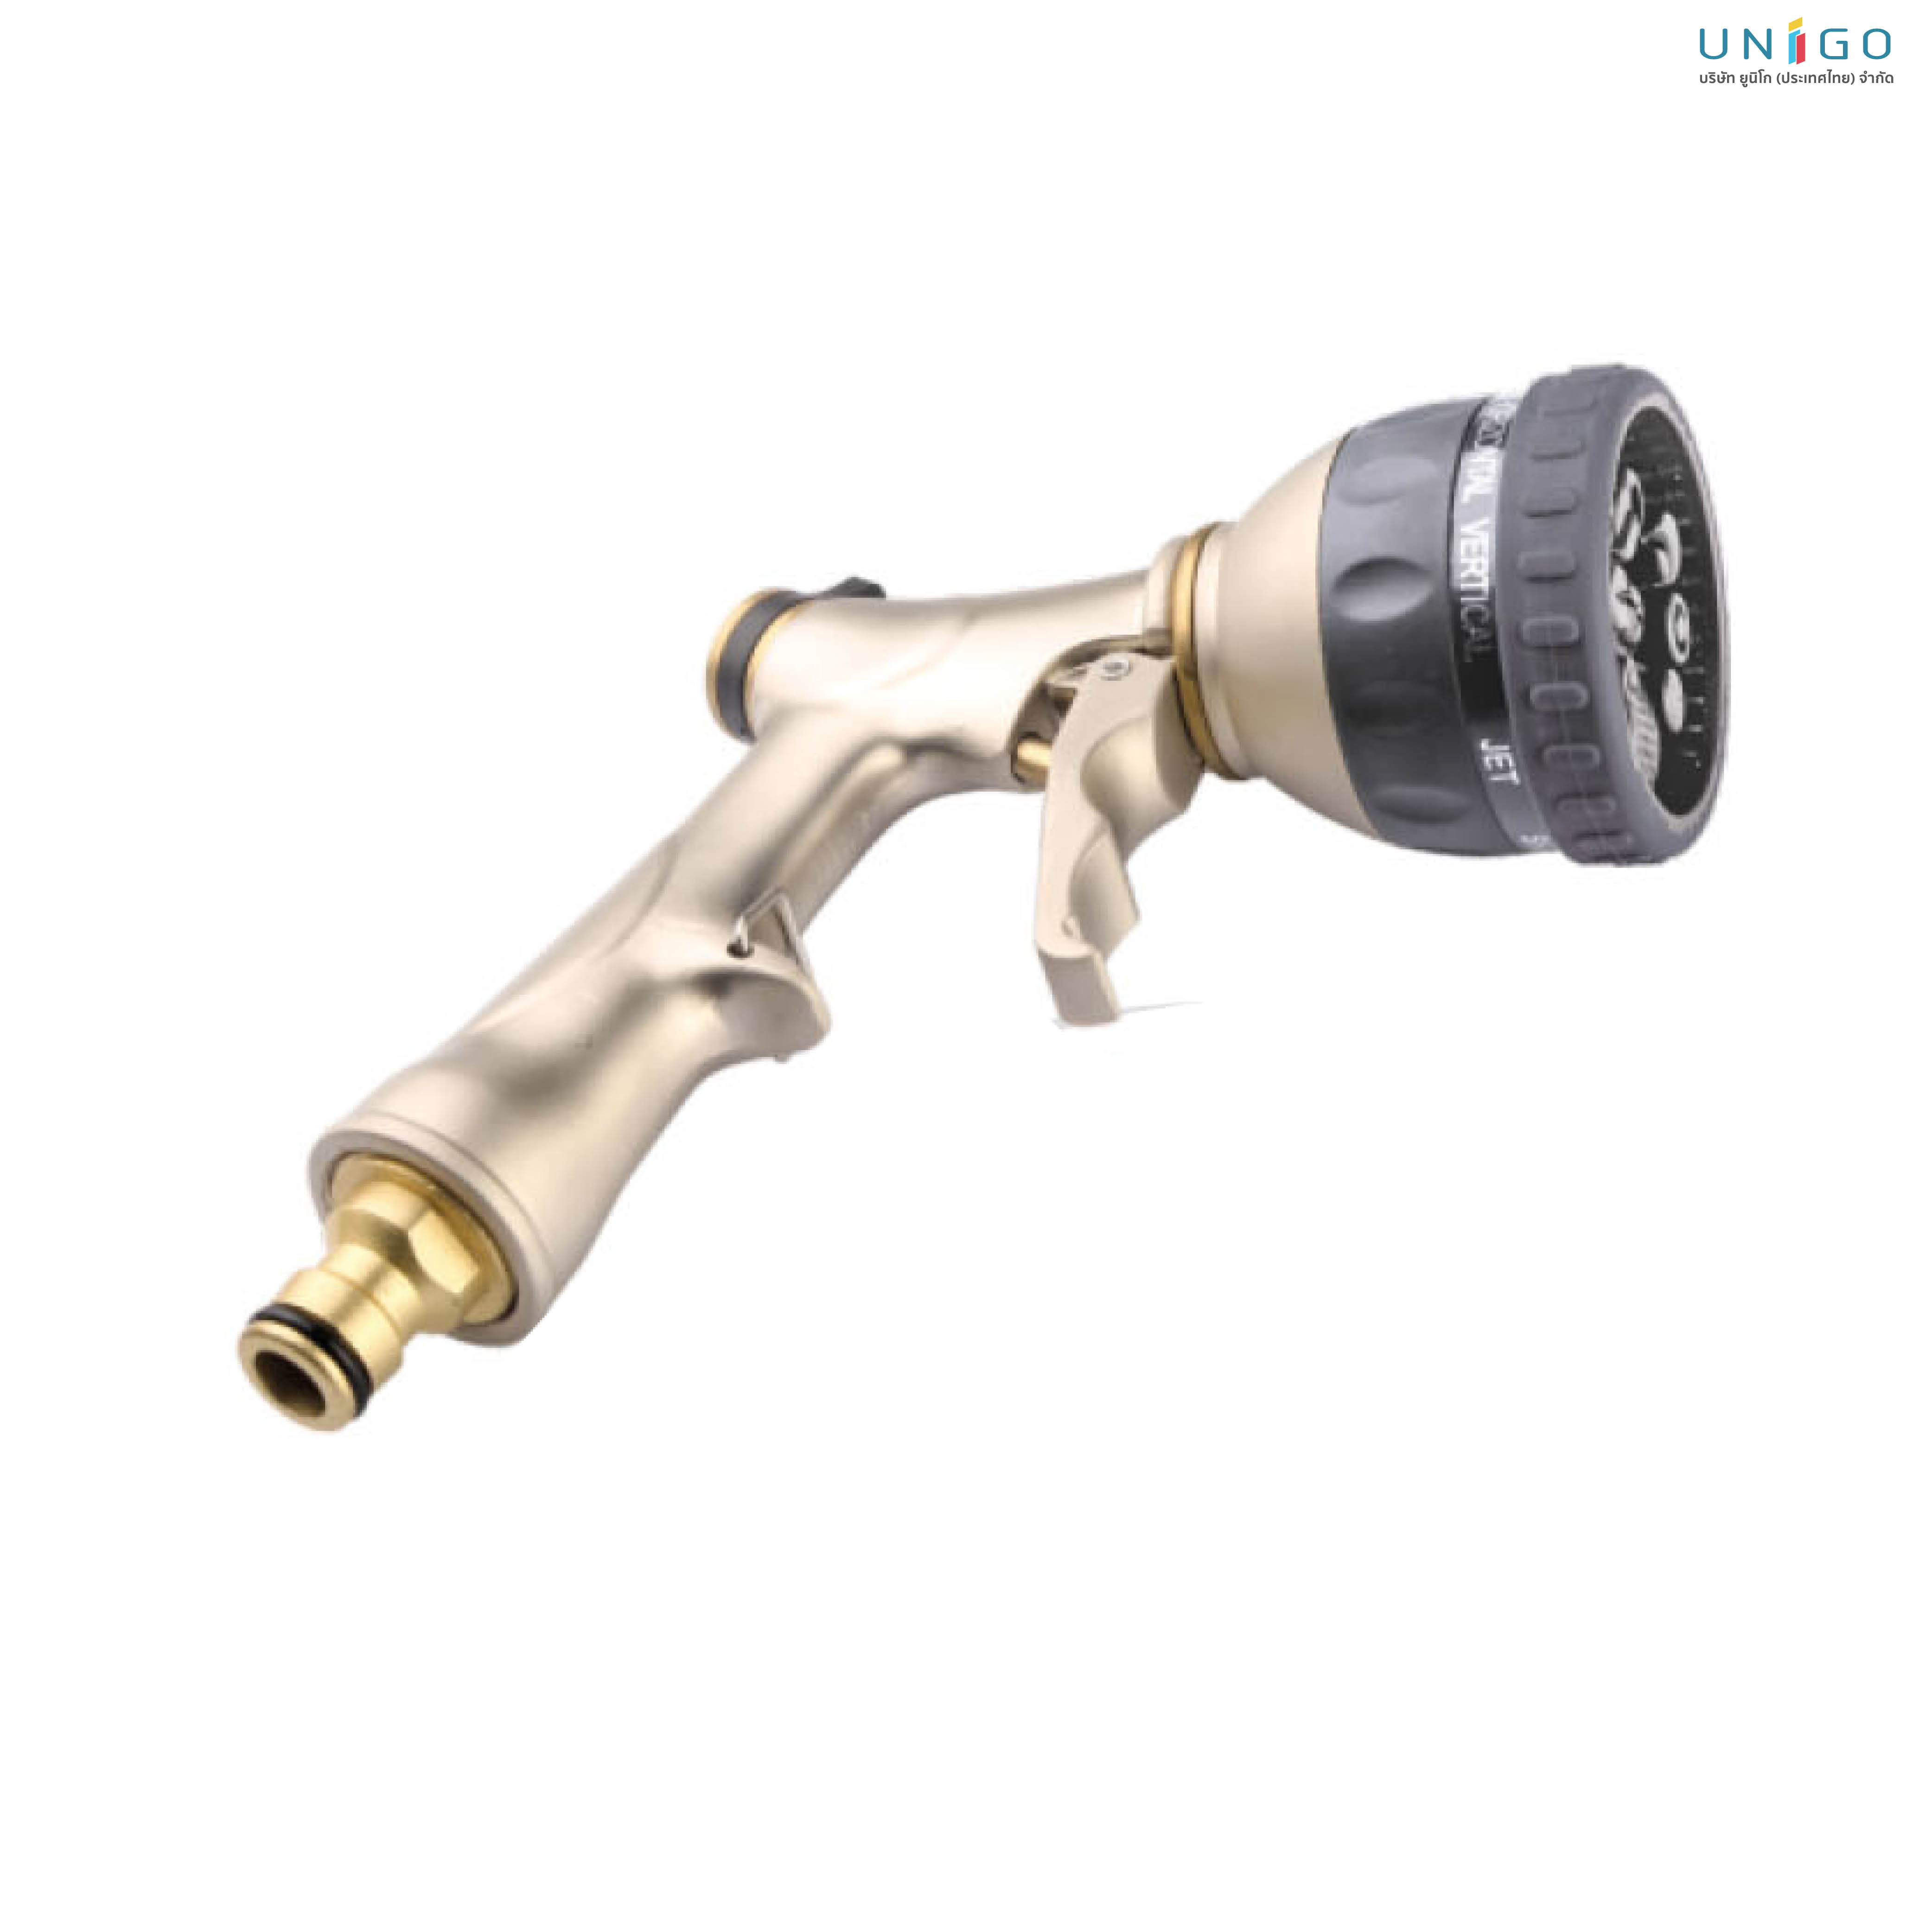 ZINC ALLOY  8 pattern spray nozzle with  brass tool adaptor 8 